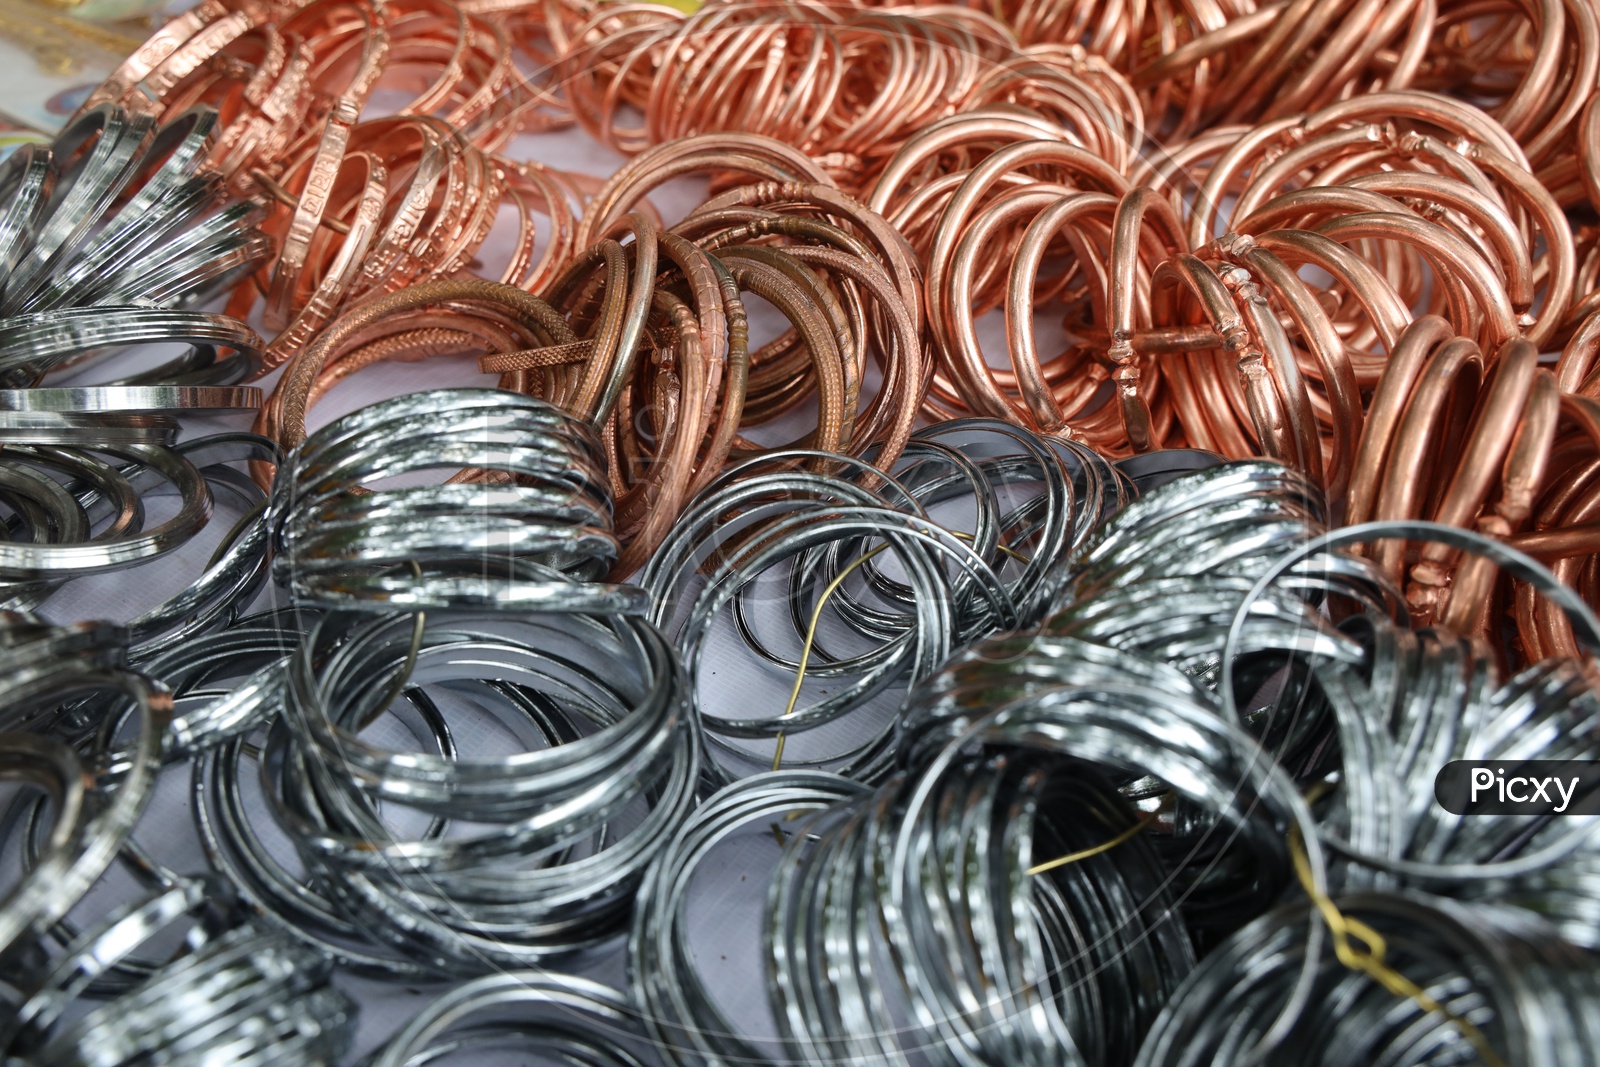 Steel and Brass Bracelets In a Vendor Stall